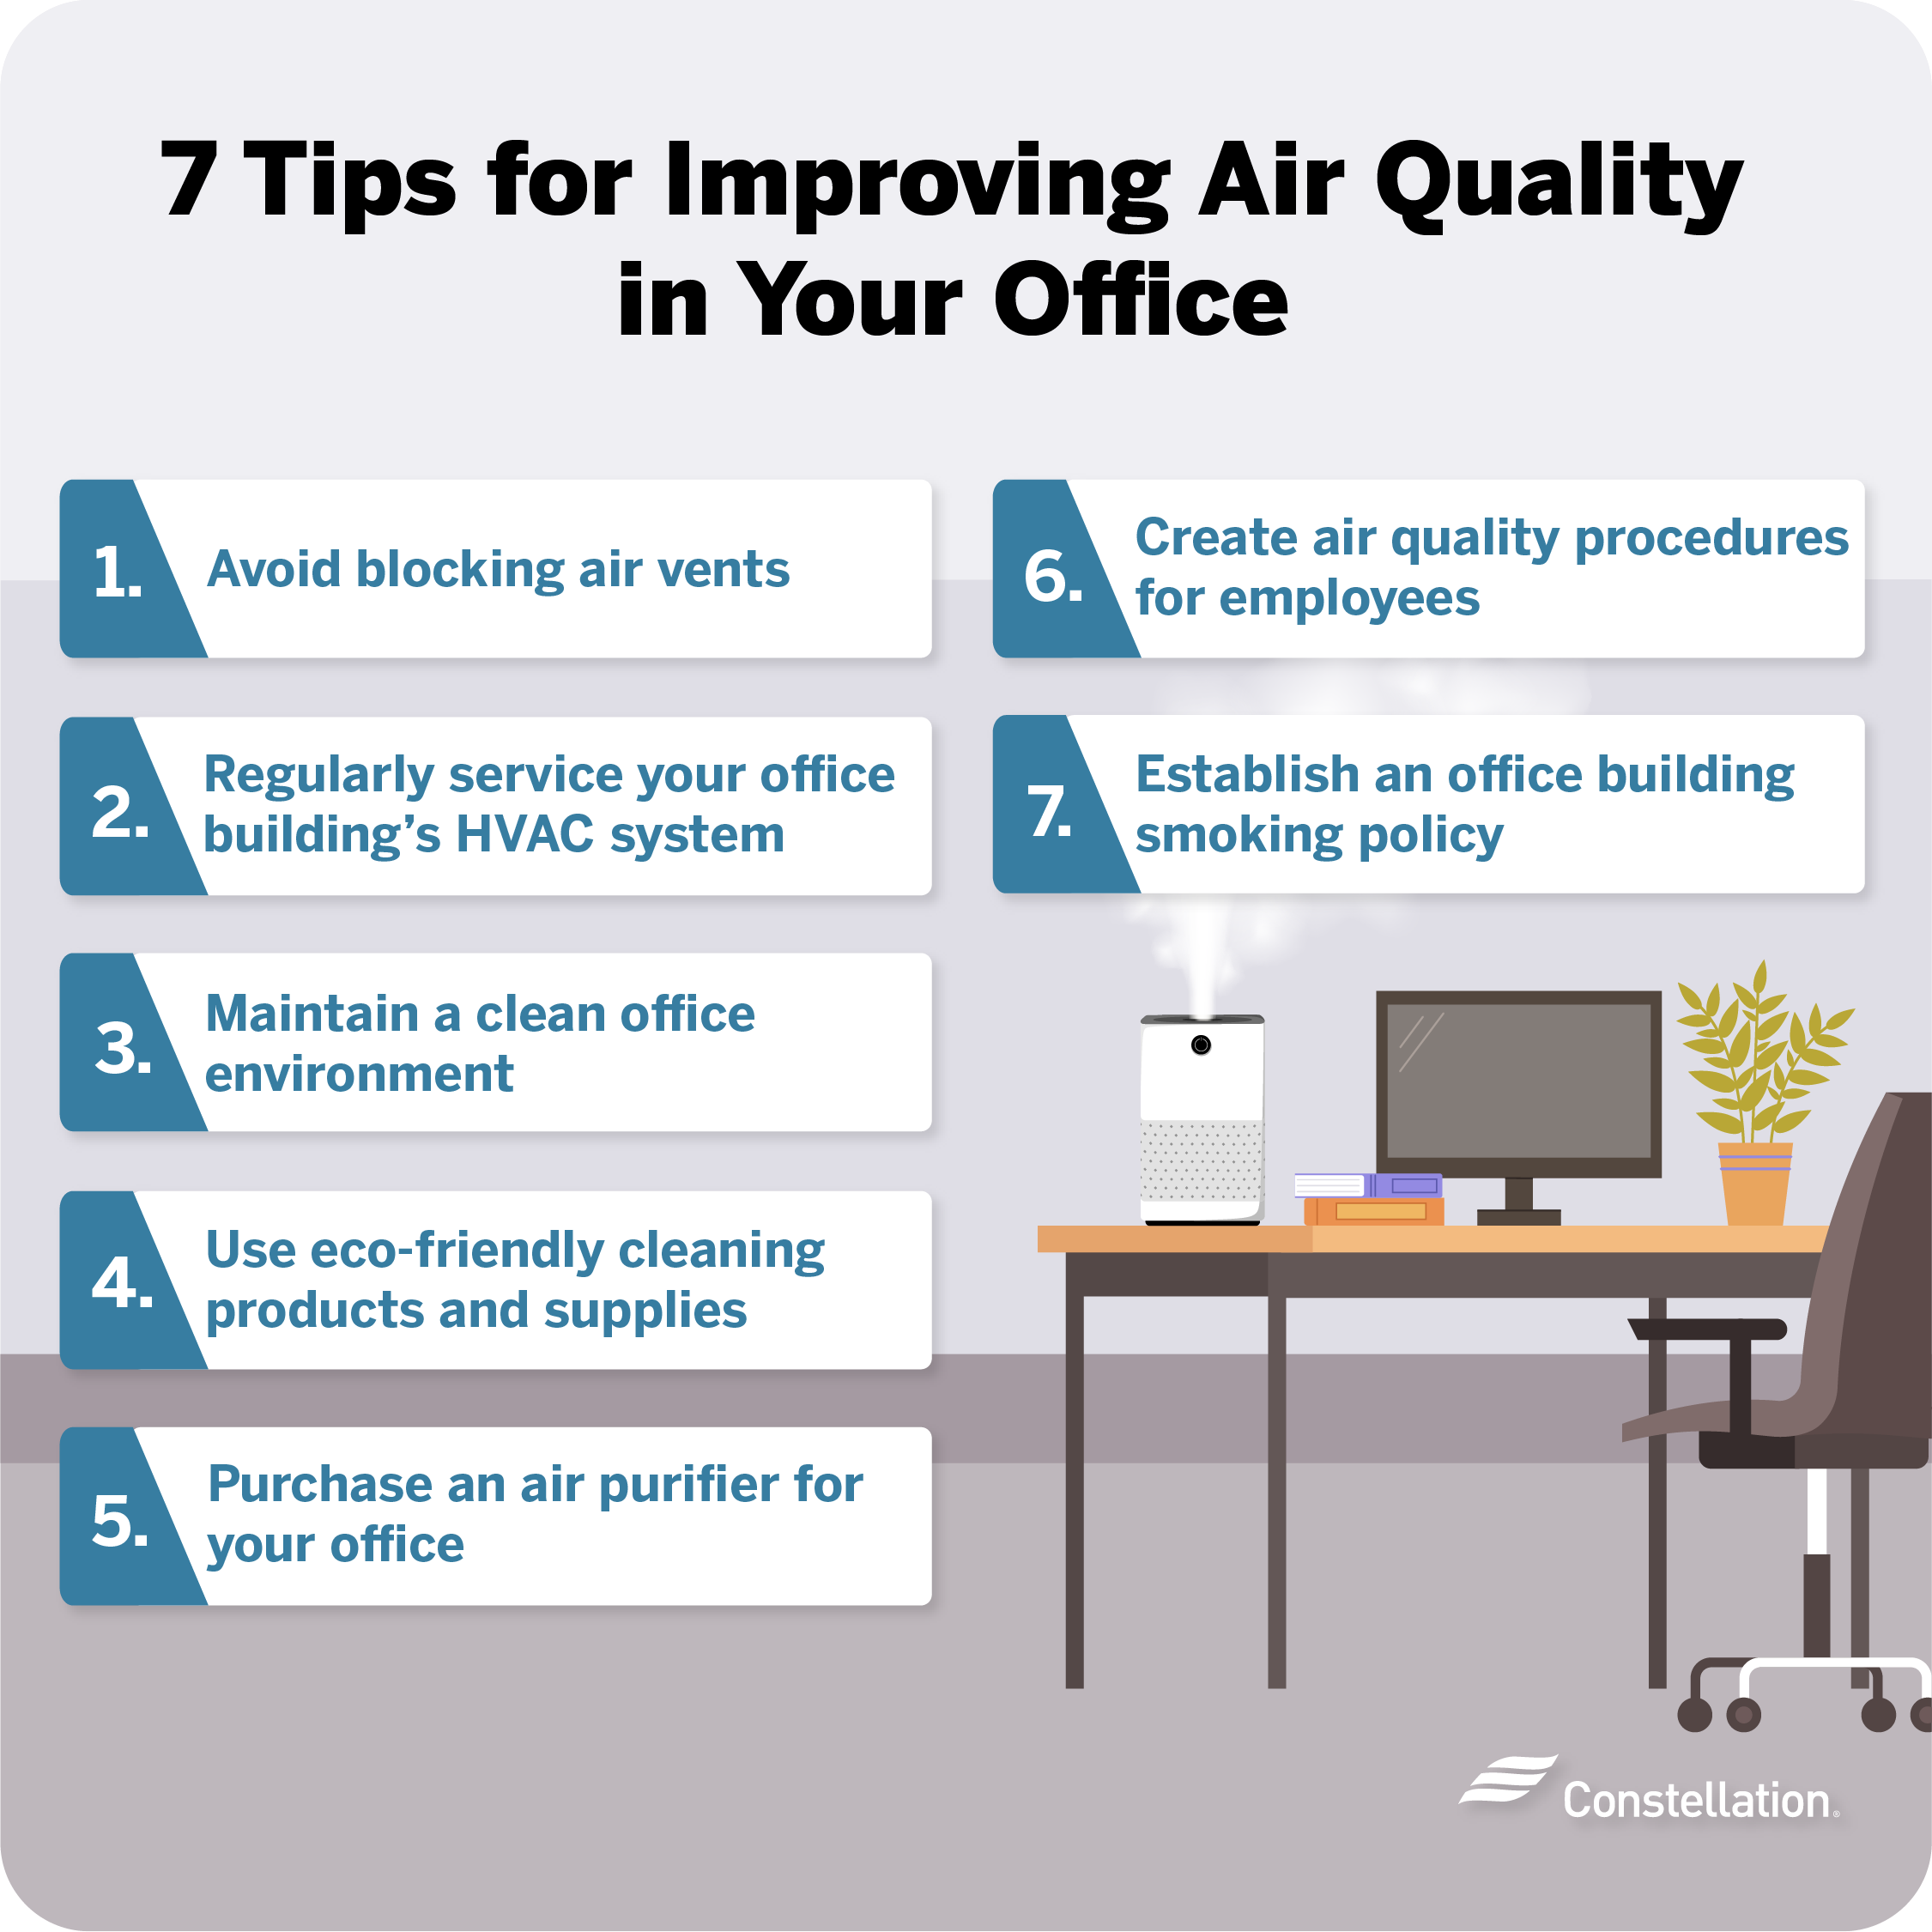 Tips for improving office air quality.